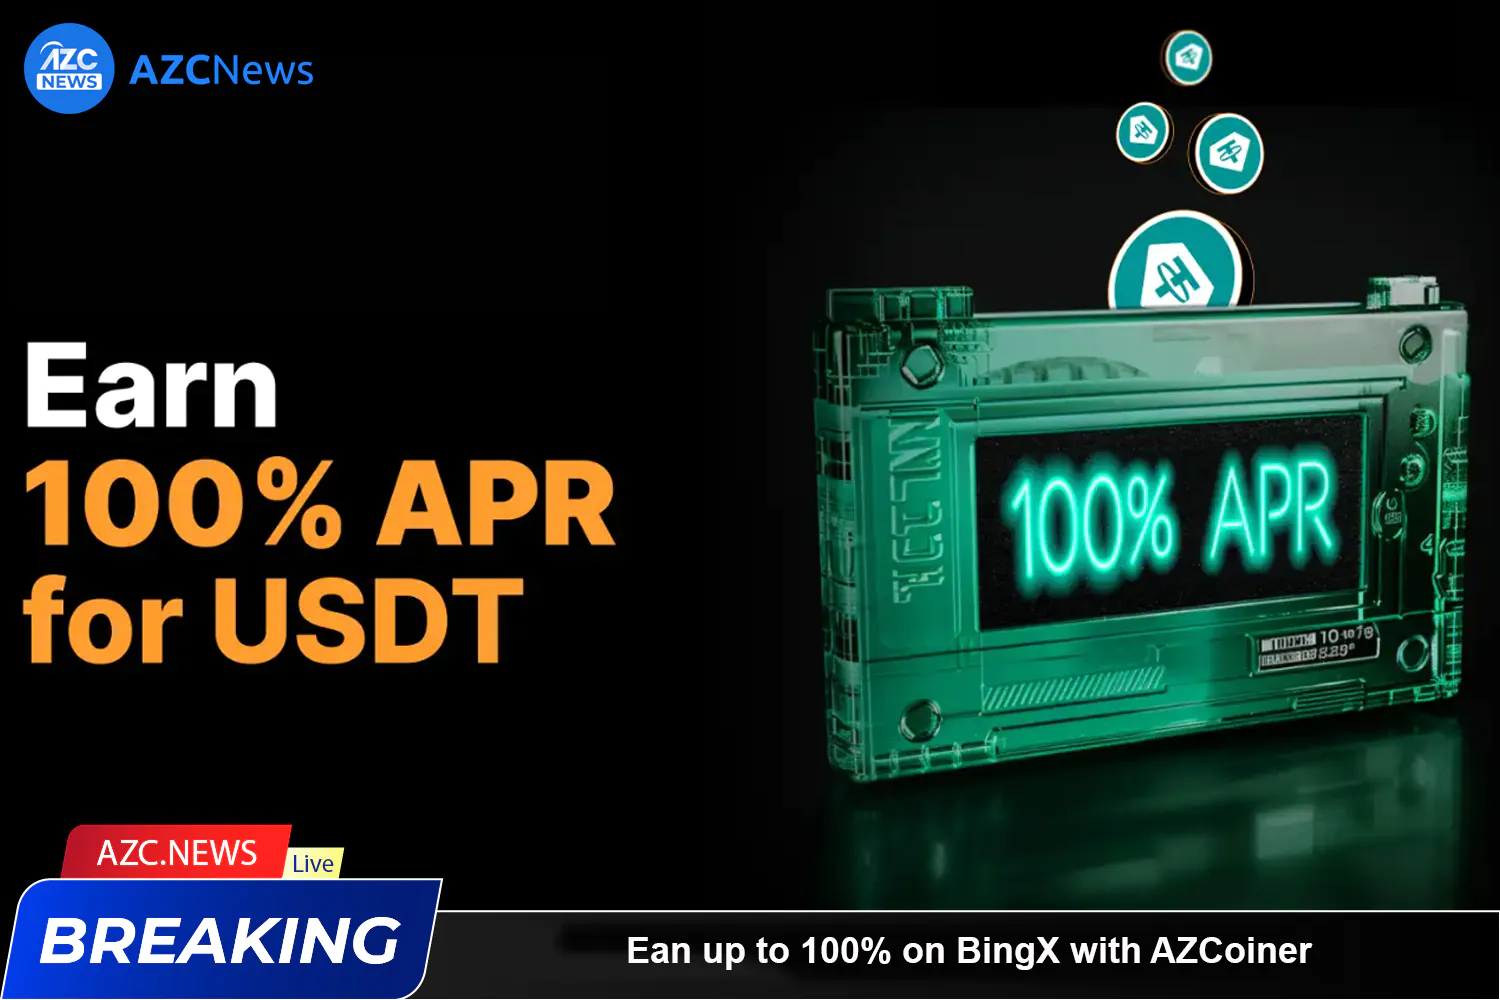 Ean Up To 100% On Bingx With Azcoiner Azc